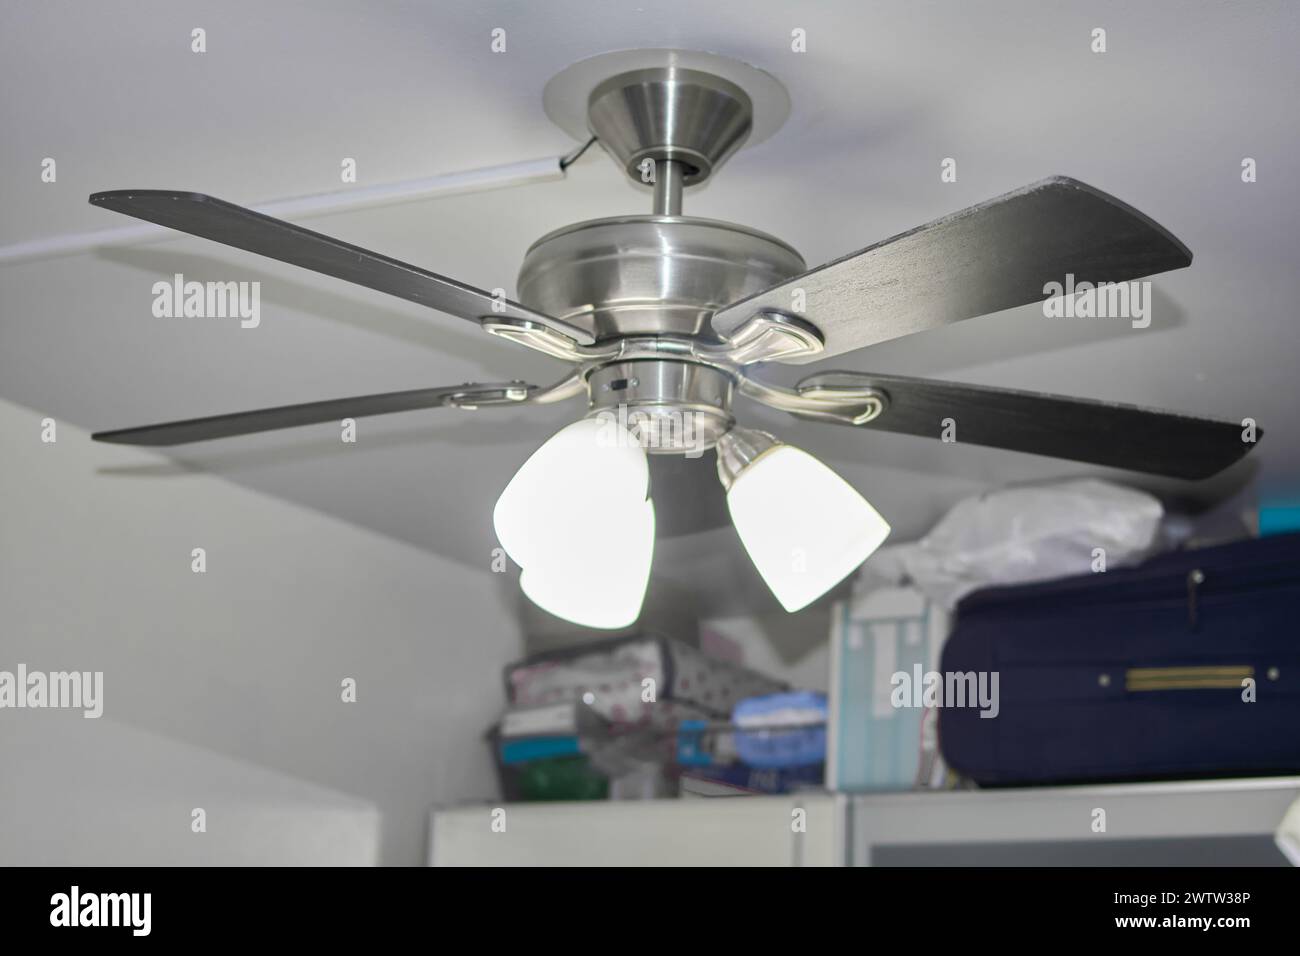 Elegant ceiling fan for a cool atmosphere and subtle lighting. Stock Photo